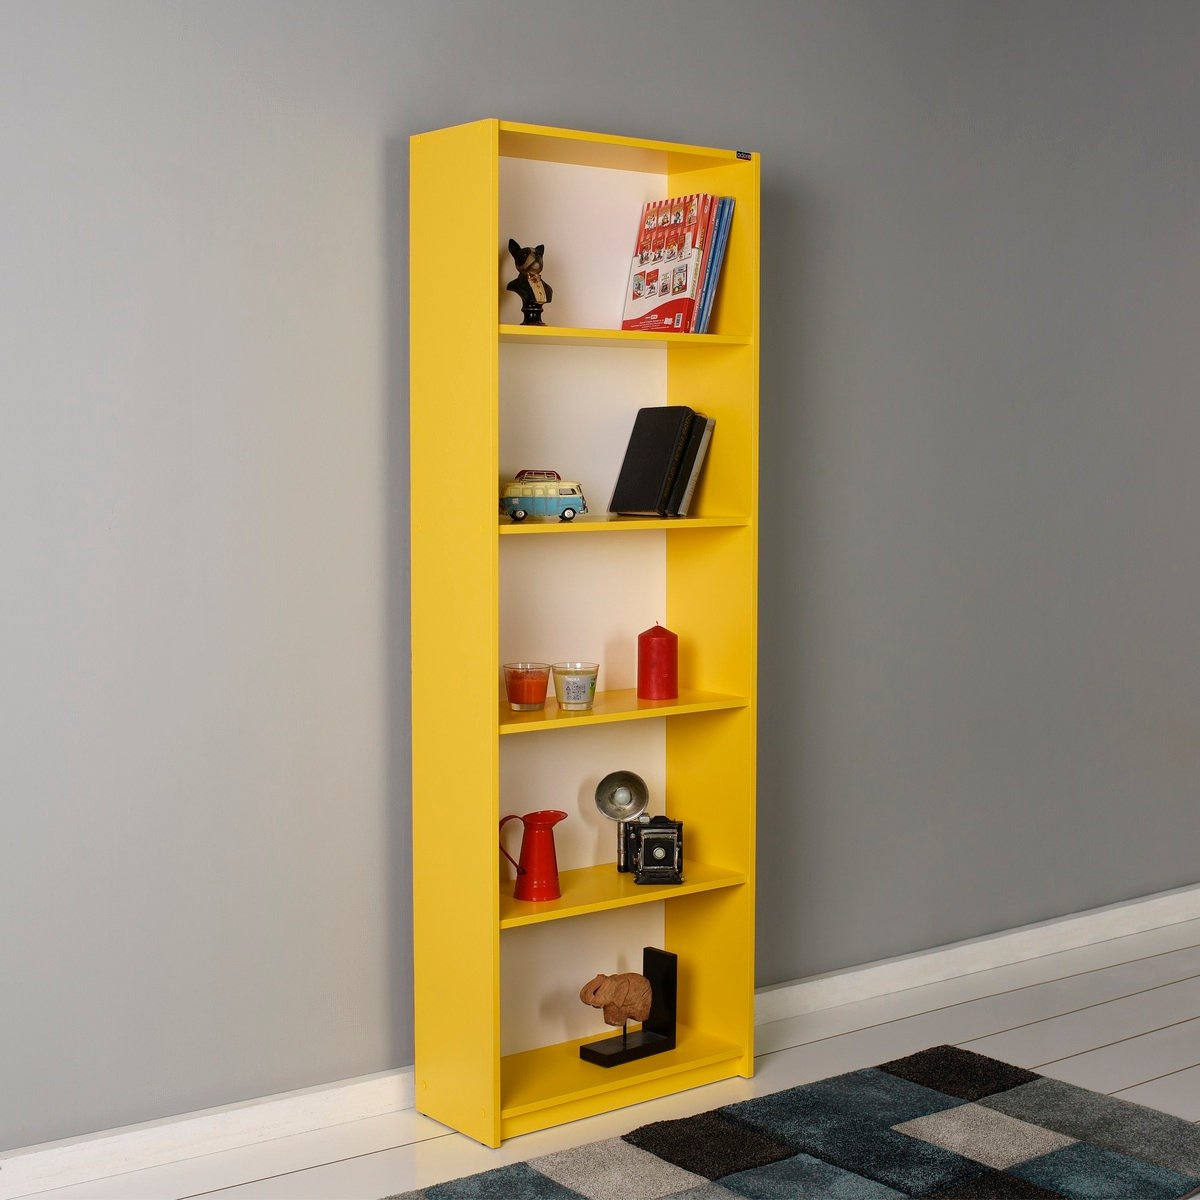 Maple Leaf Home Book Shelf 5 Layer Yellow Size: H170 x W 58 x D23cm Made In Turkey